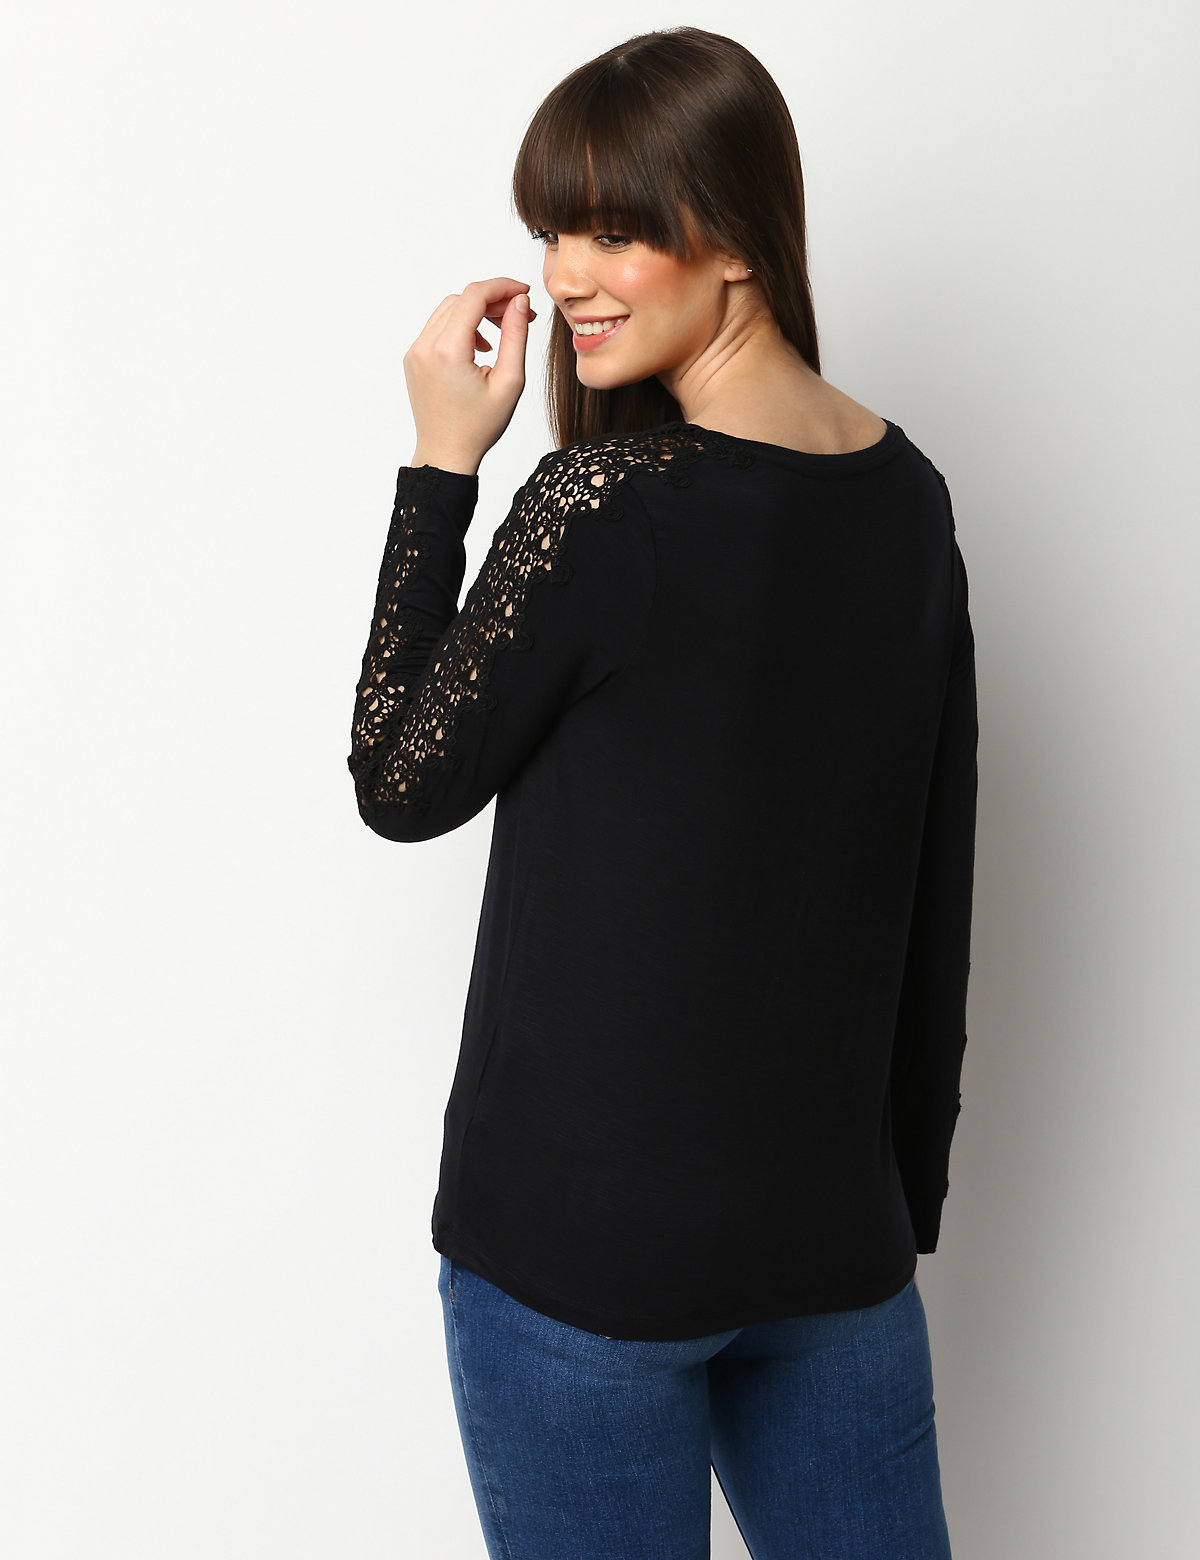 Lace Detail Tee